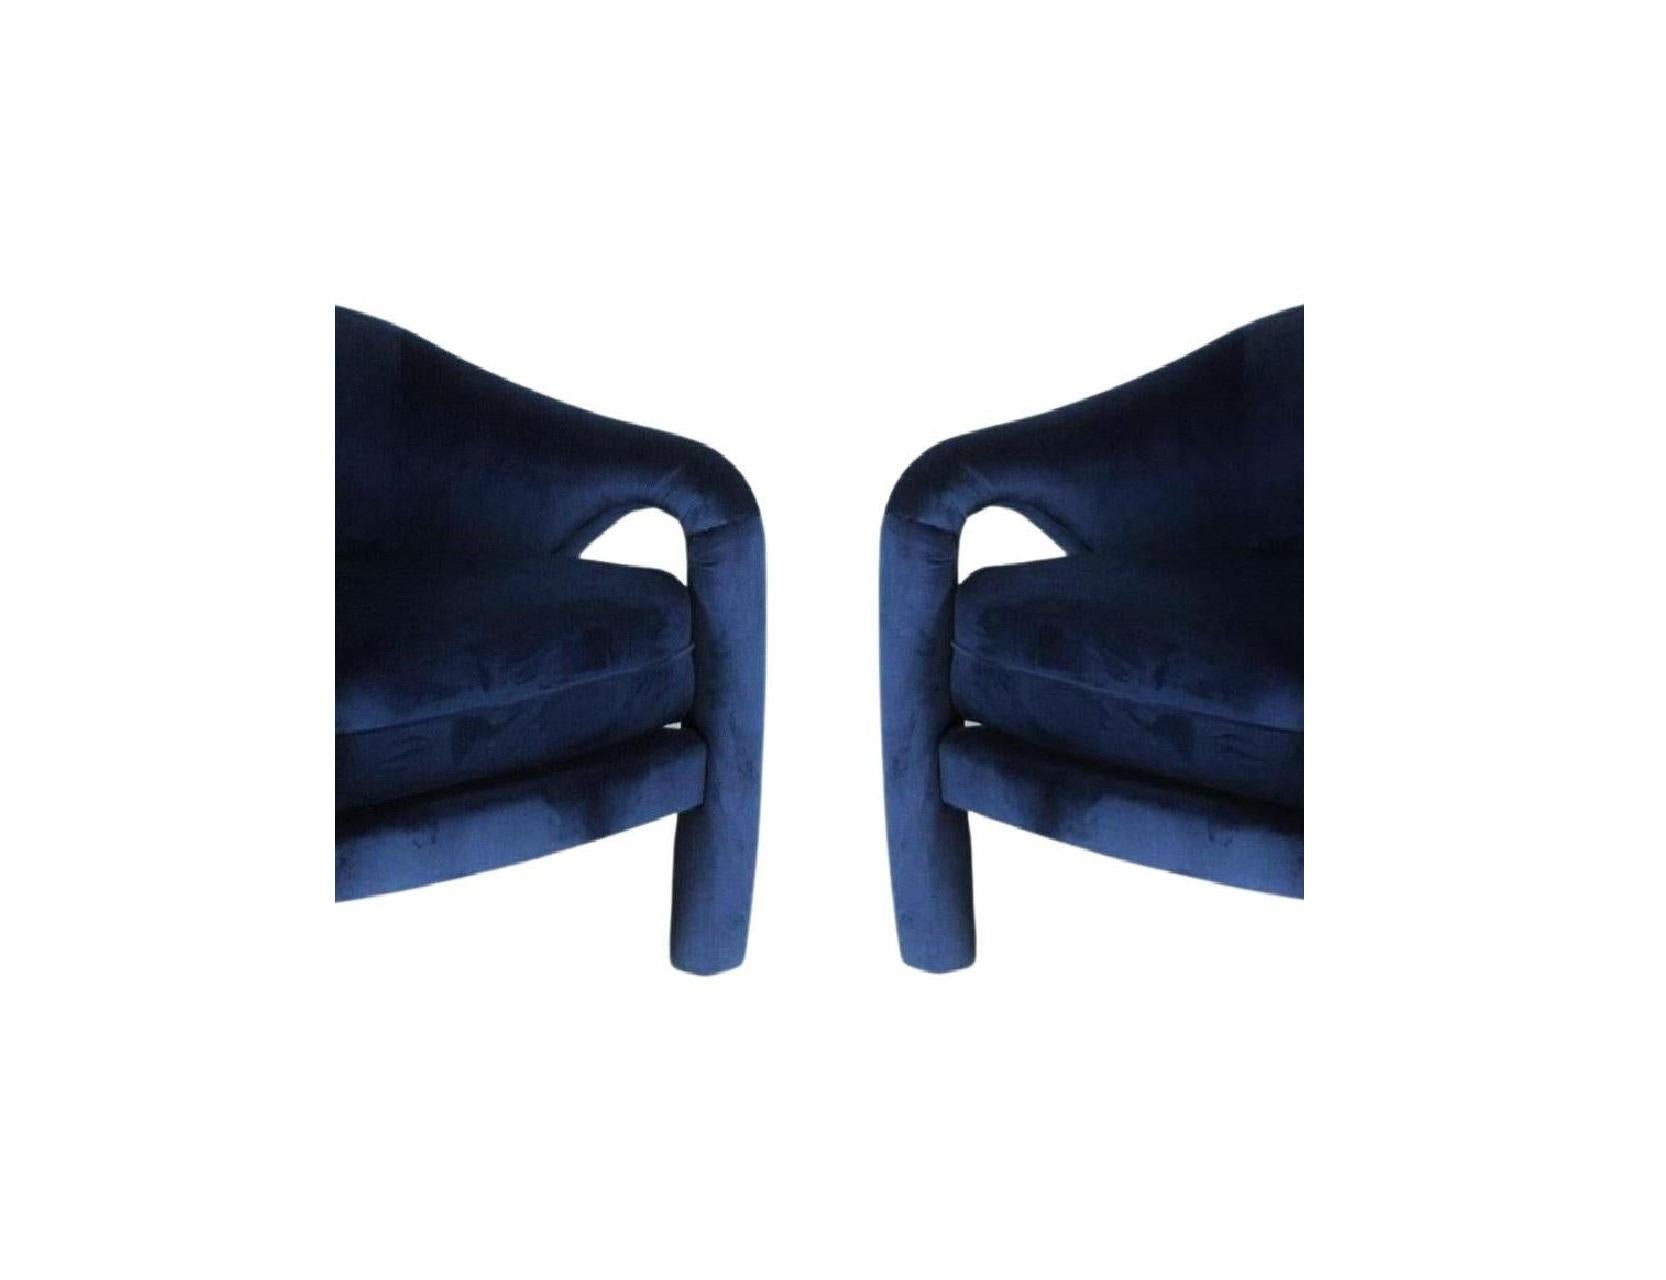 Vladimir Kaganesque Navy Blue Lounge Chairs by Weiman In Excellent Condition For Sale In Dallas, TX